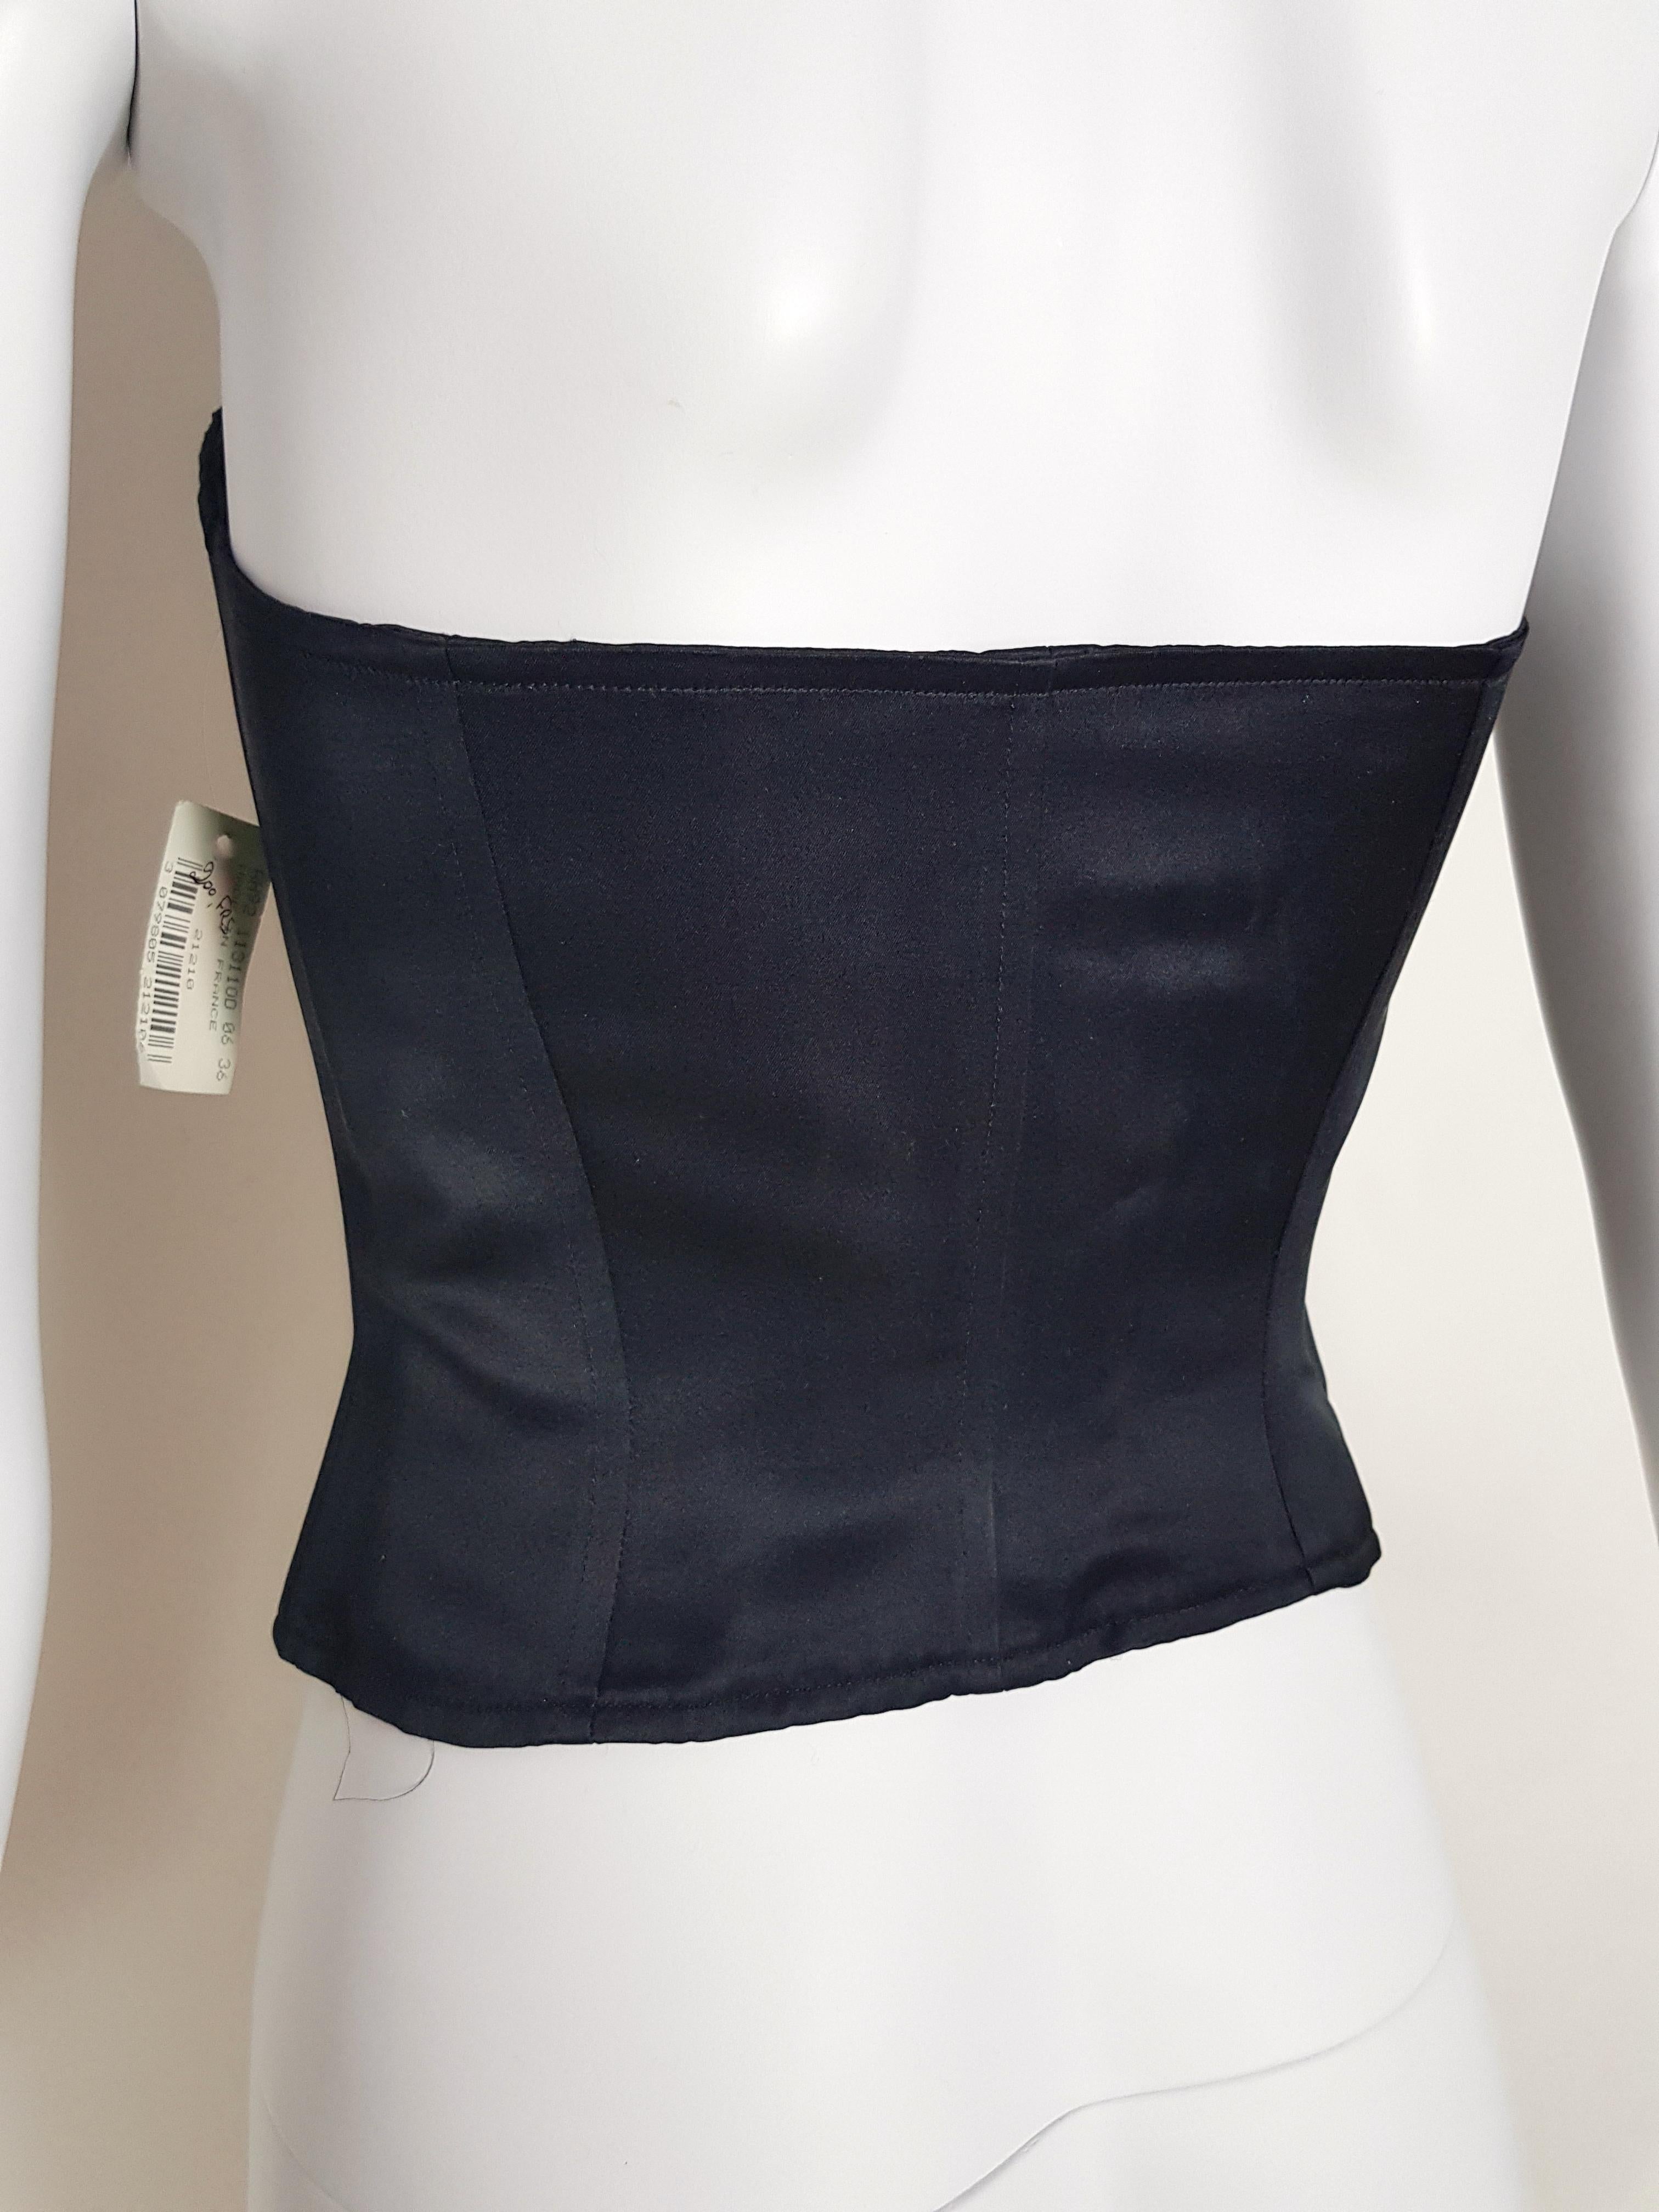 Black KENZO FW 1992 black silk Bustier NEW with tag For Sale